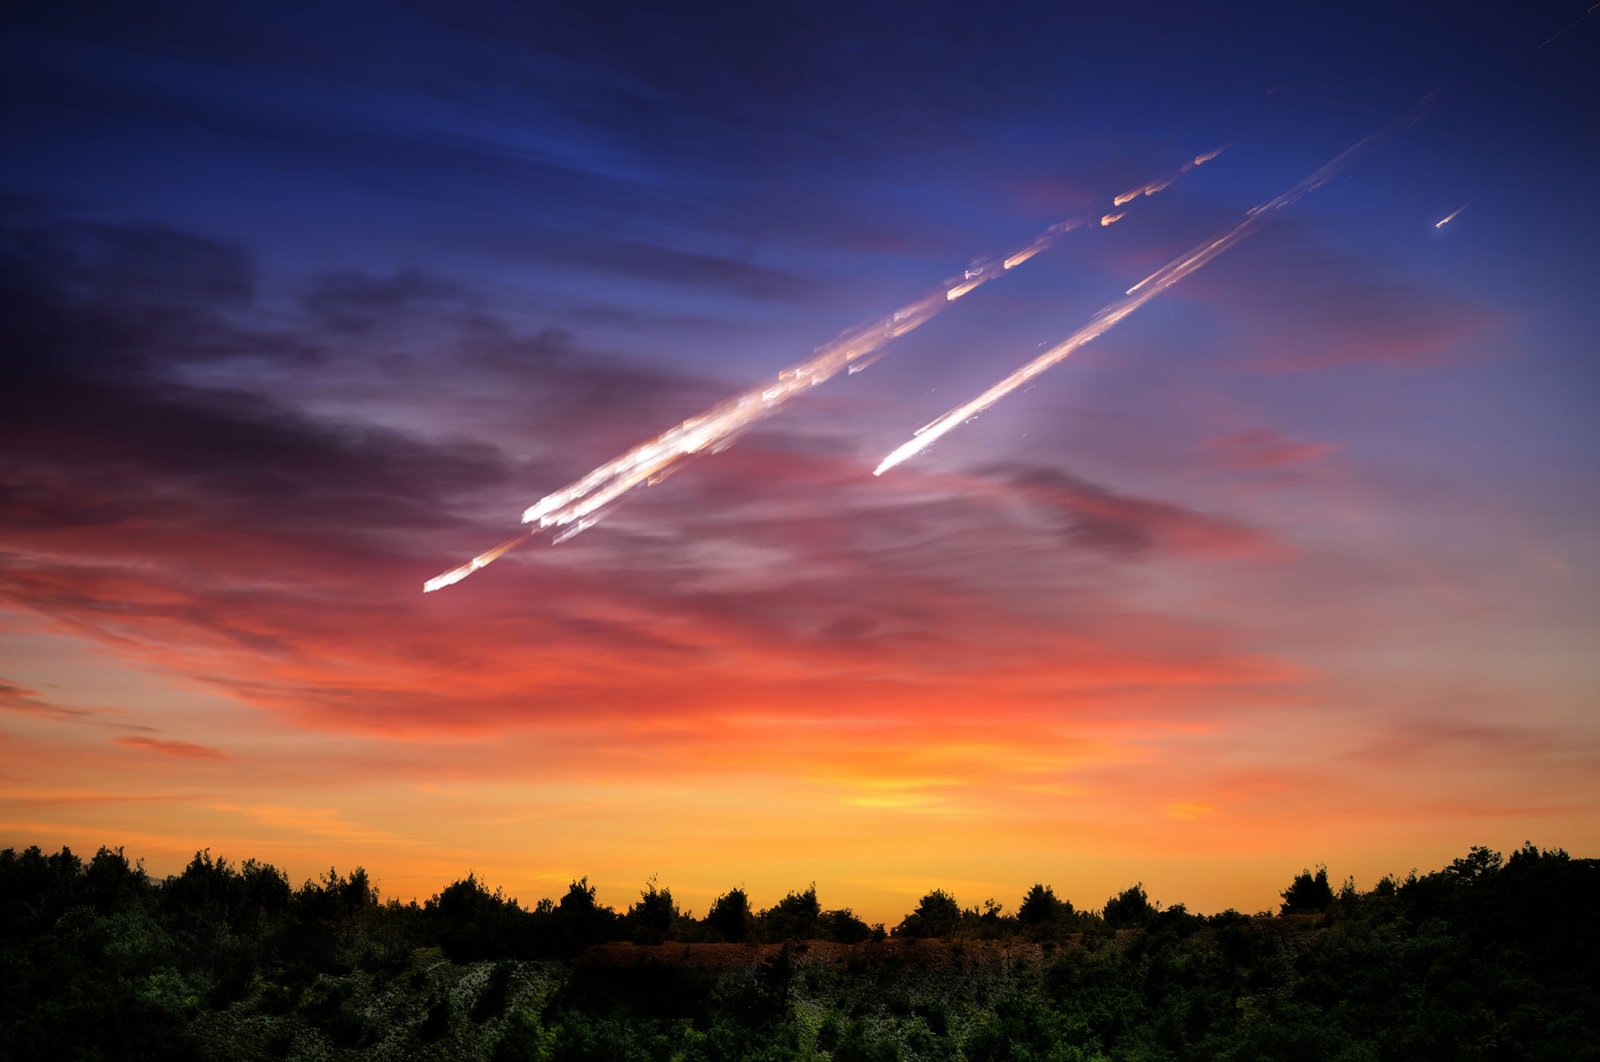 Scientists closely monitor near-Earth asteroids with the aim of reducing the possibility of collisions that could cause great damage to life. (Shutterstock Photo)